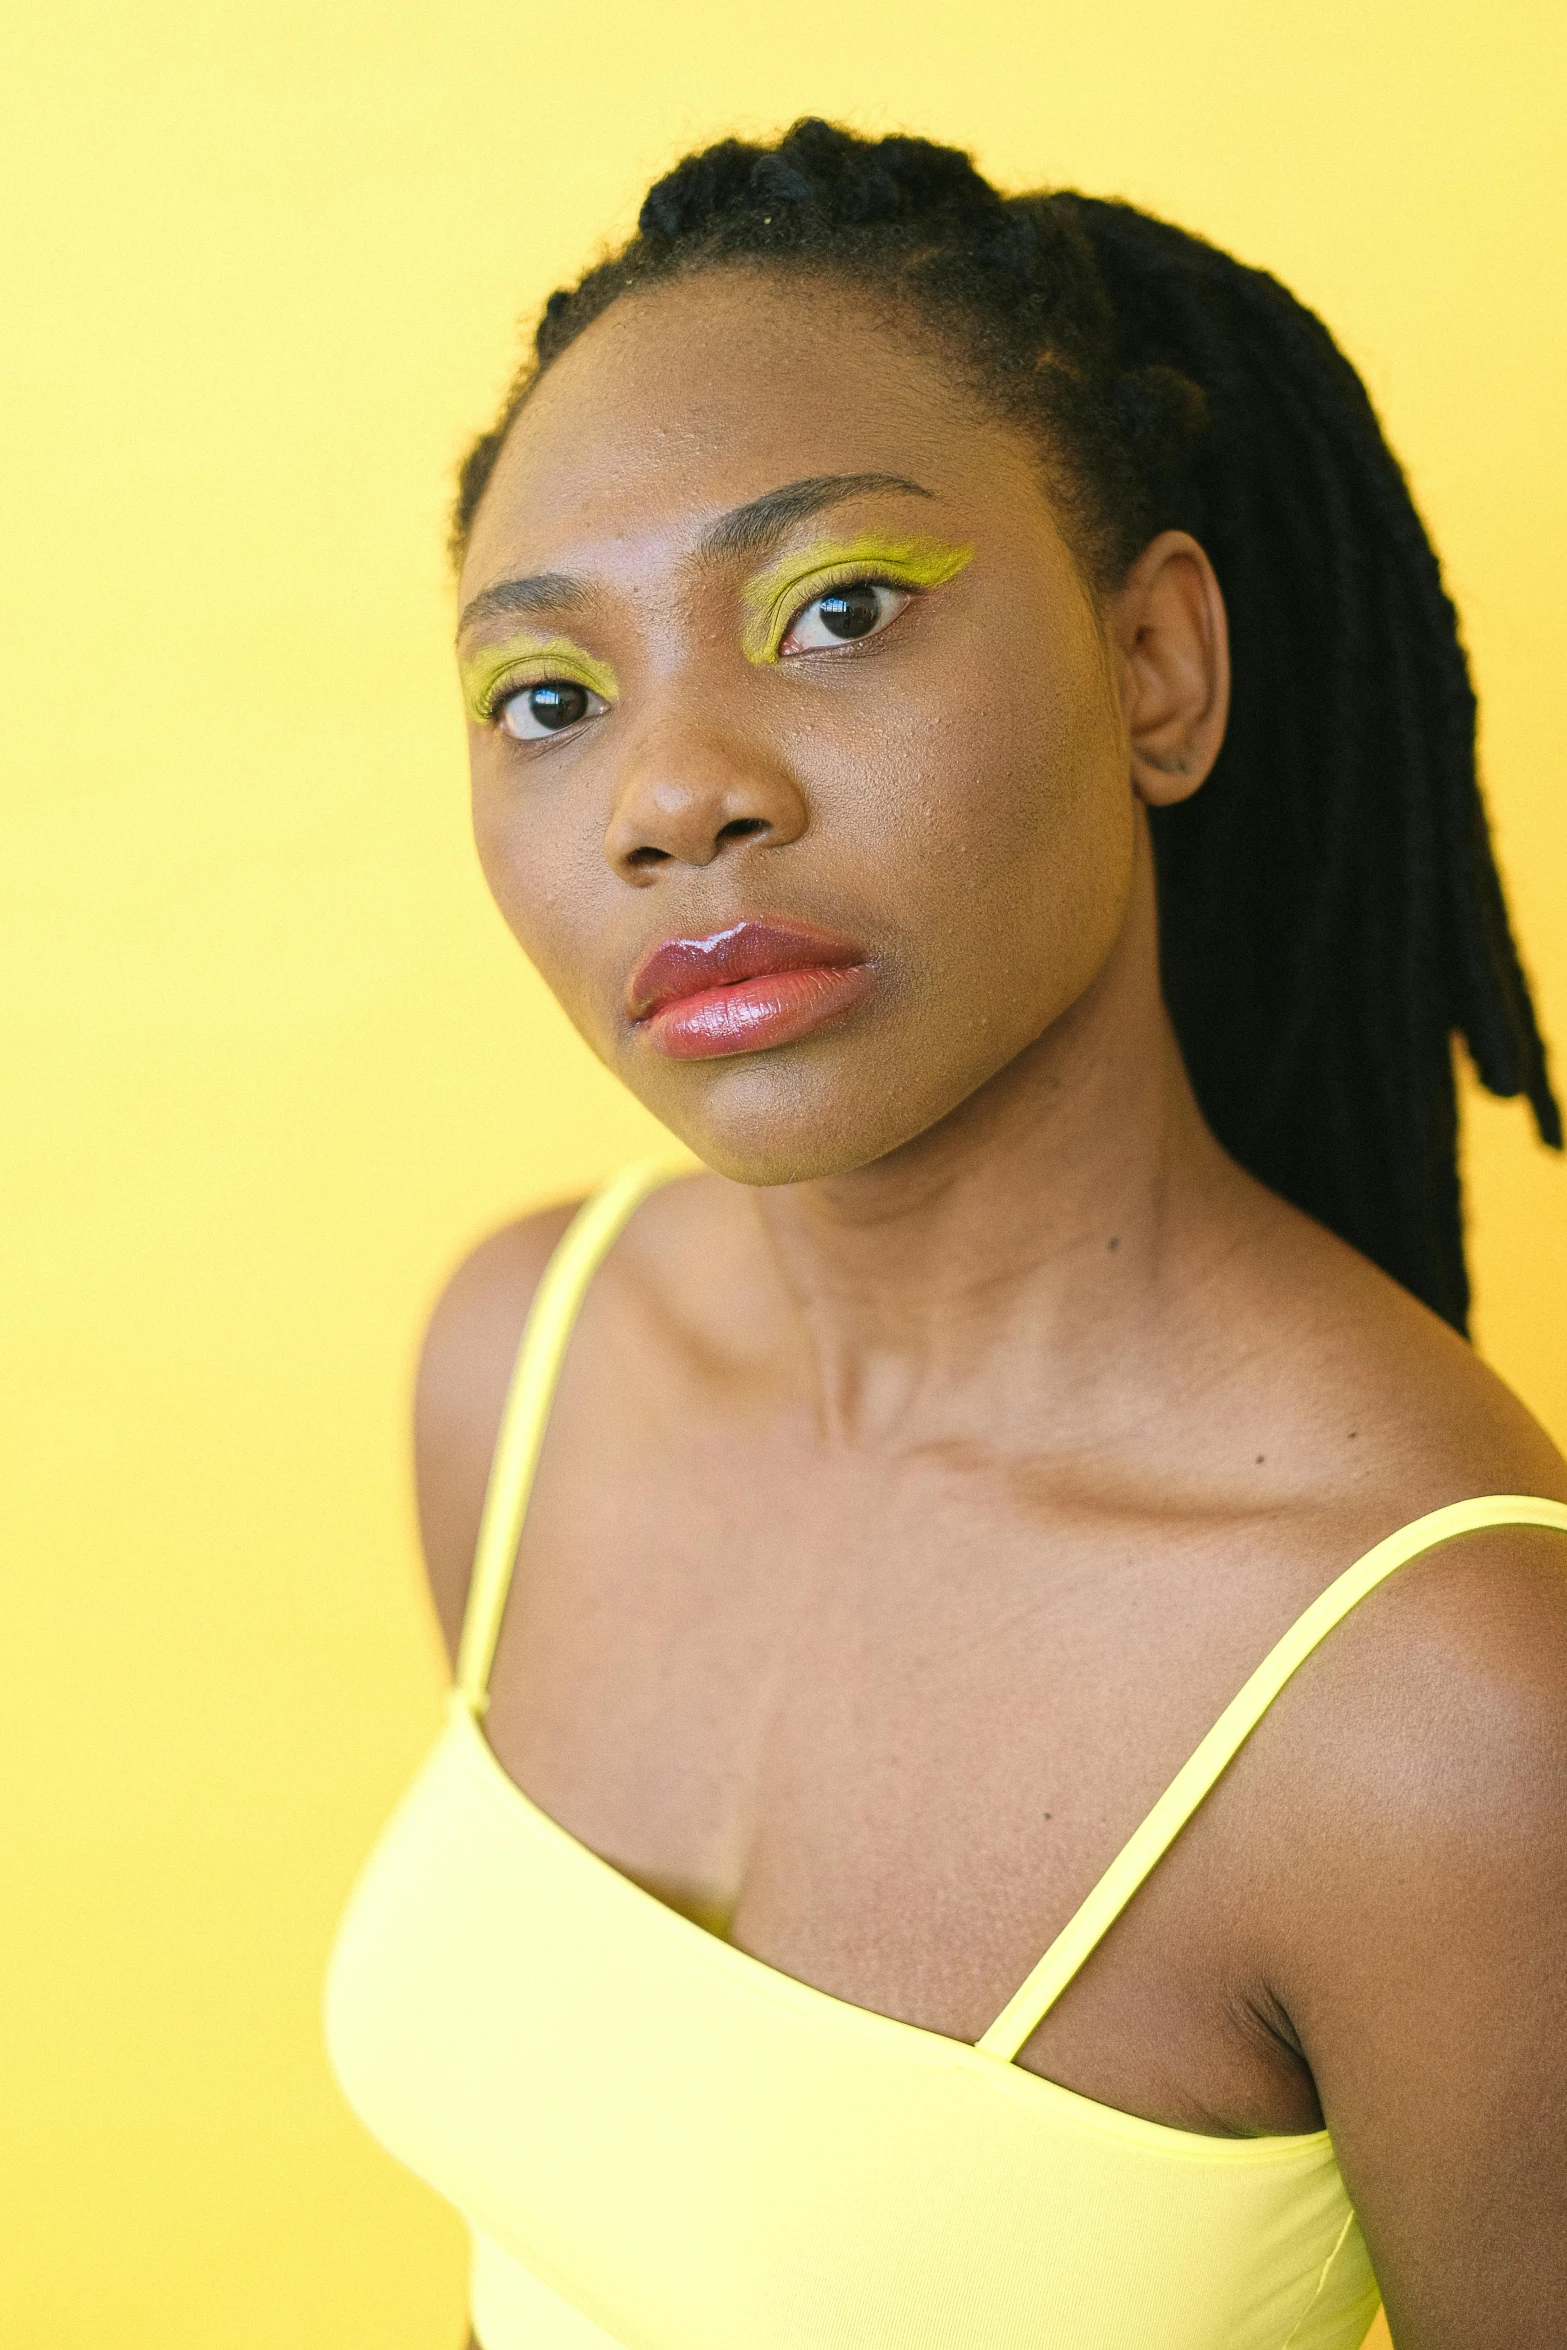 a woman in a yellow top is posing